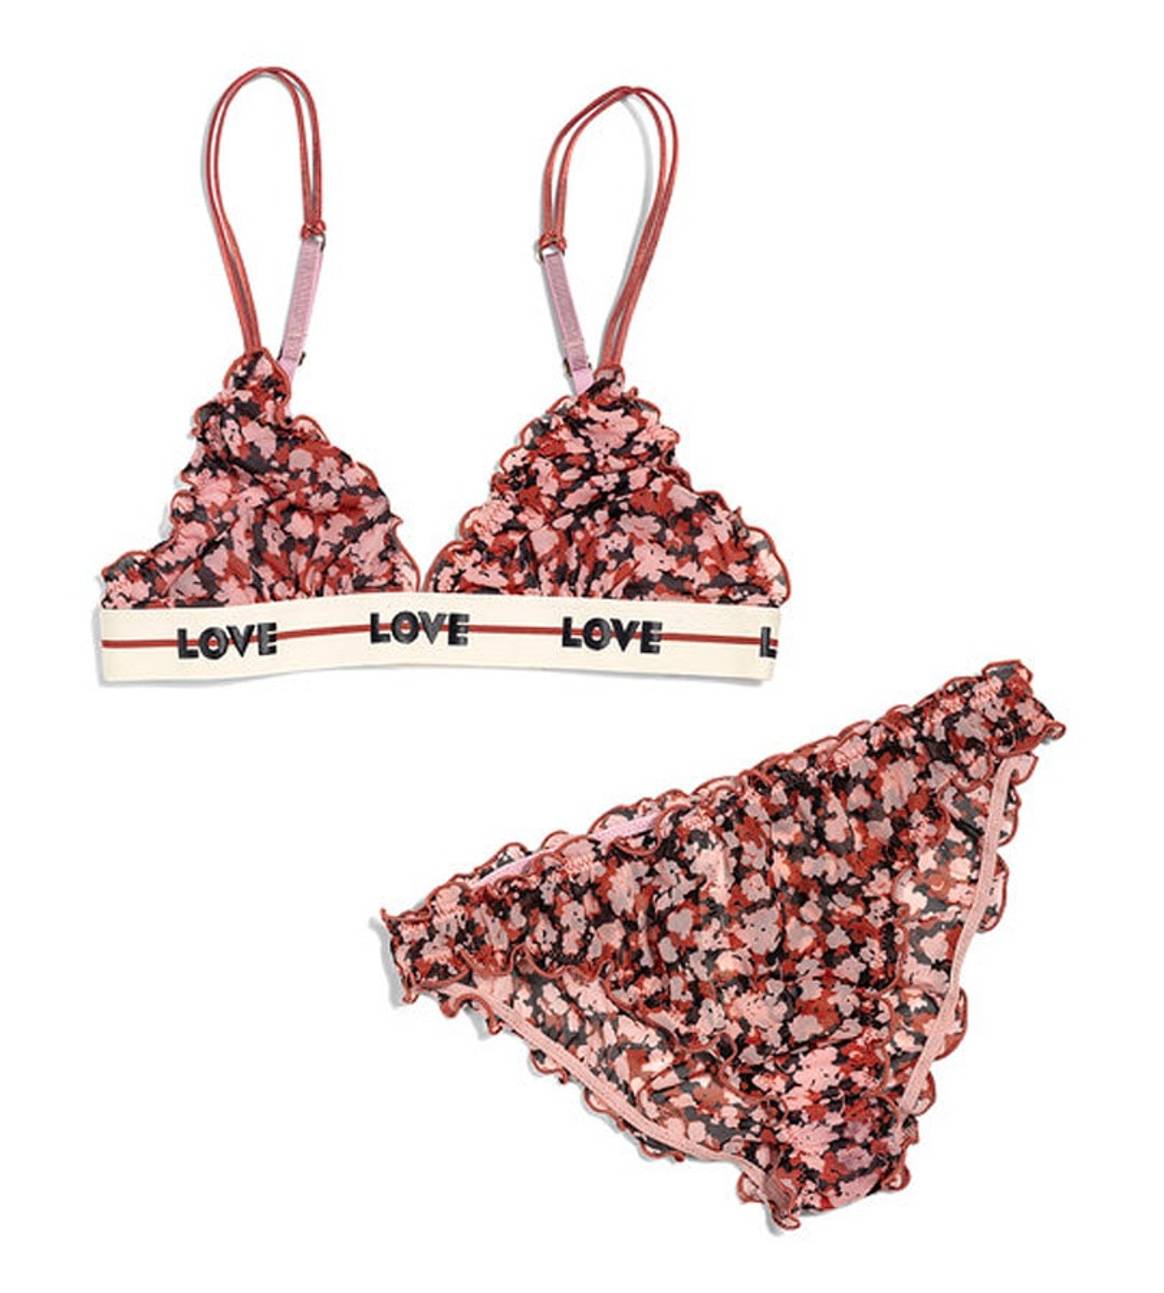 H&M elevates growing lingerie brand Love Stories with new collection